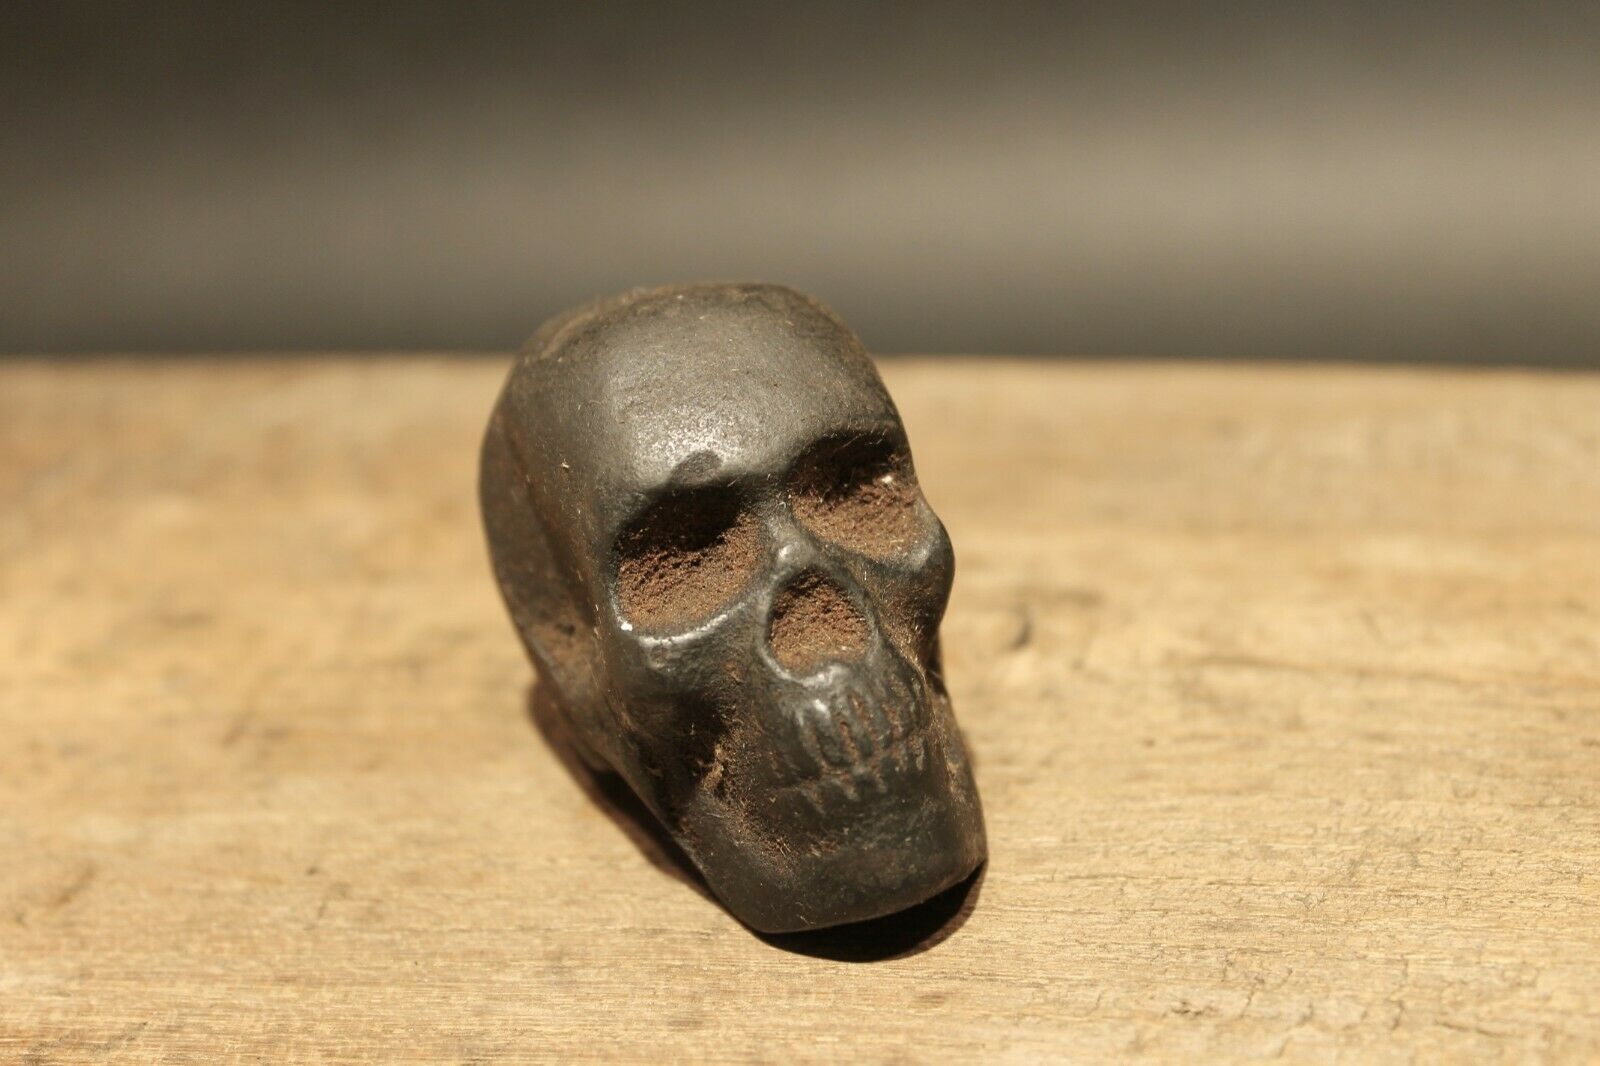 Vintage Antique Style Miniature Cast Iron Skull Paperweight - Early Home Decor